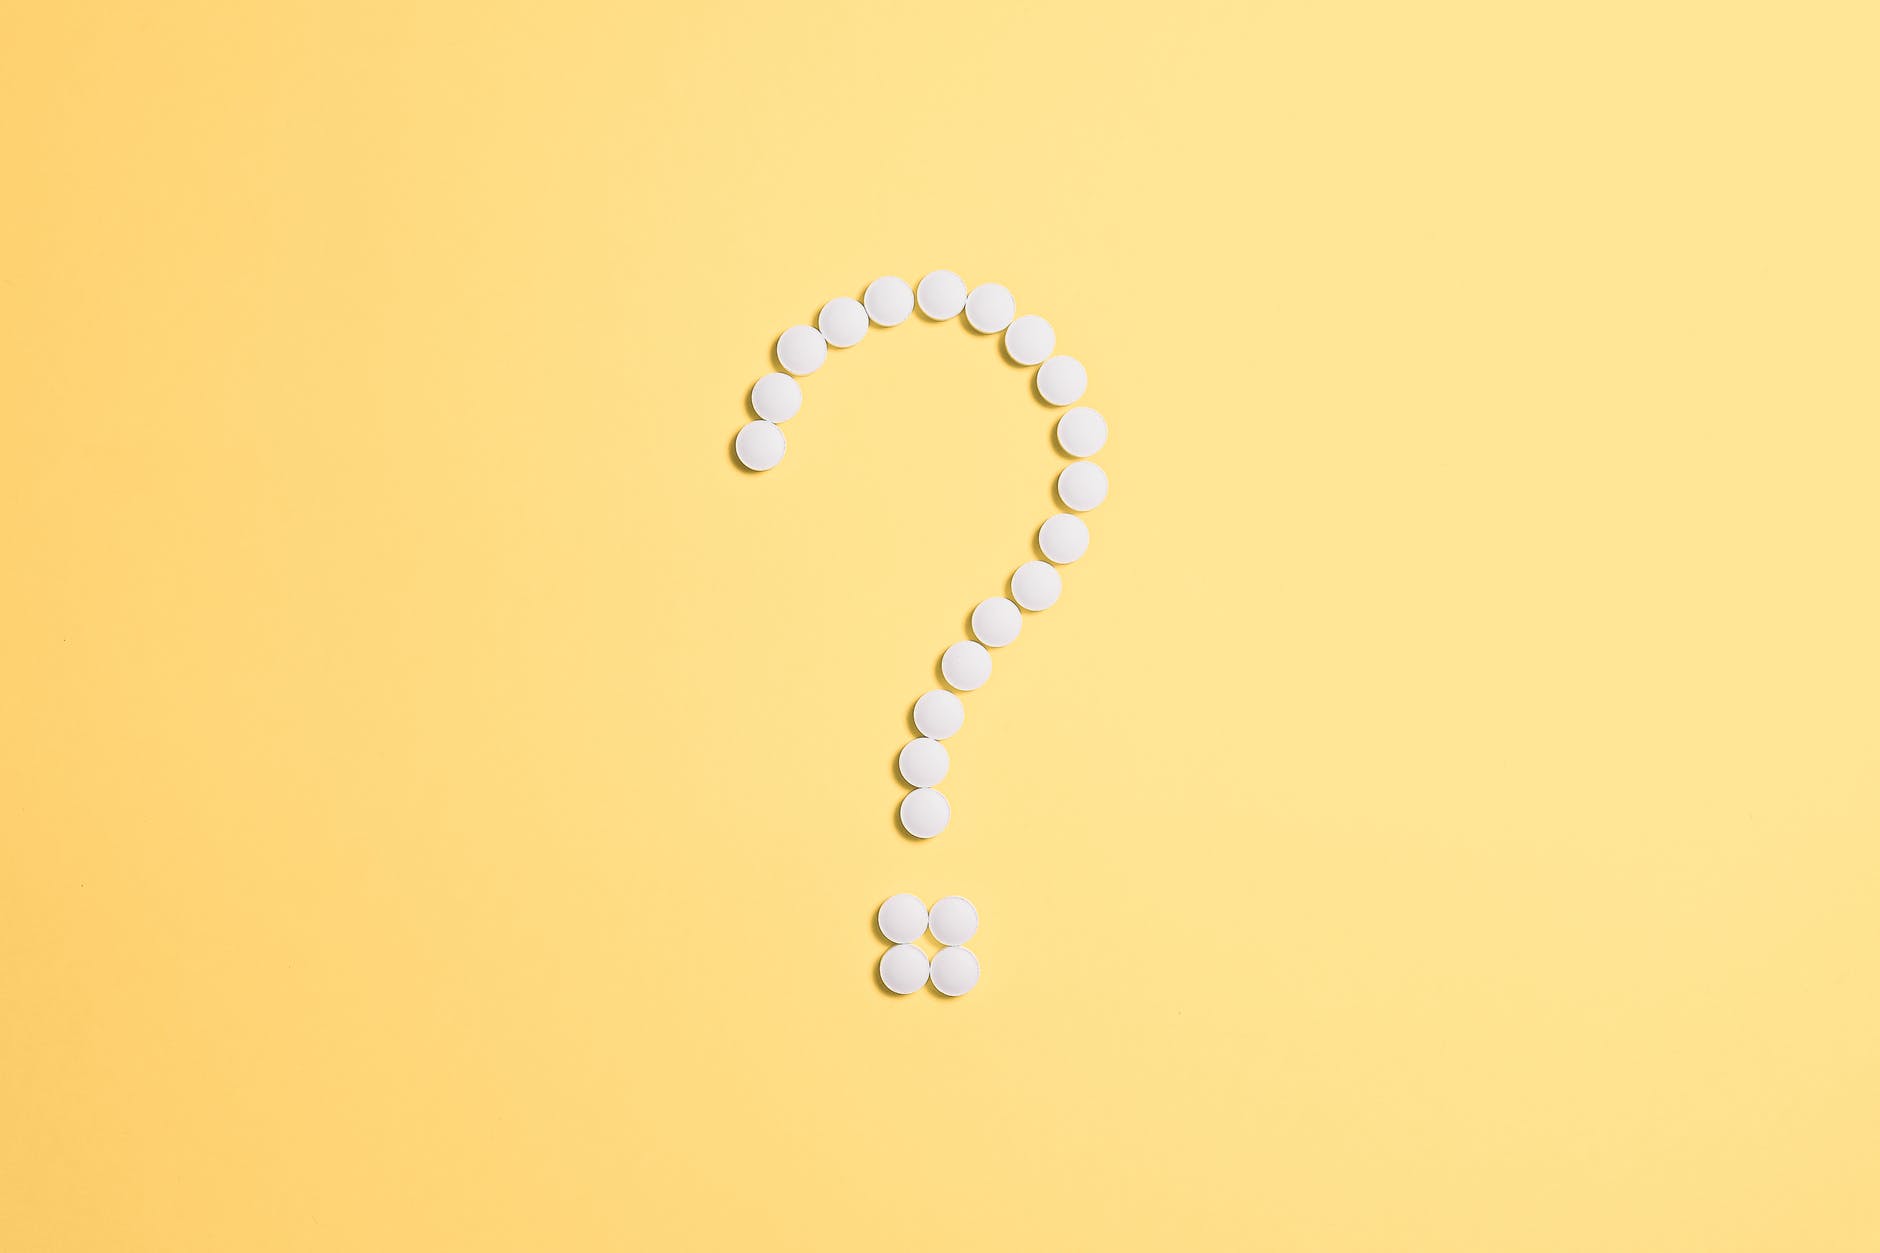 pills fixed as question mark sign